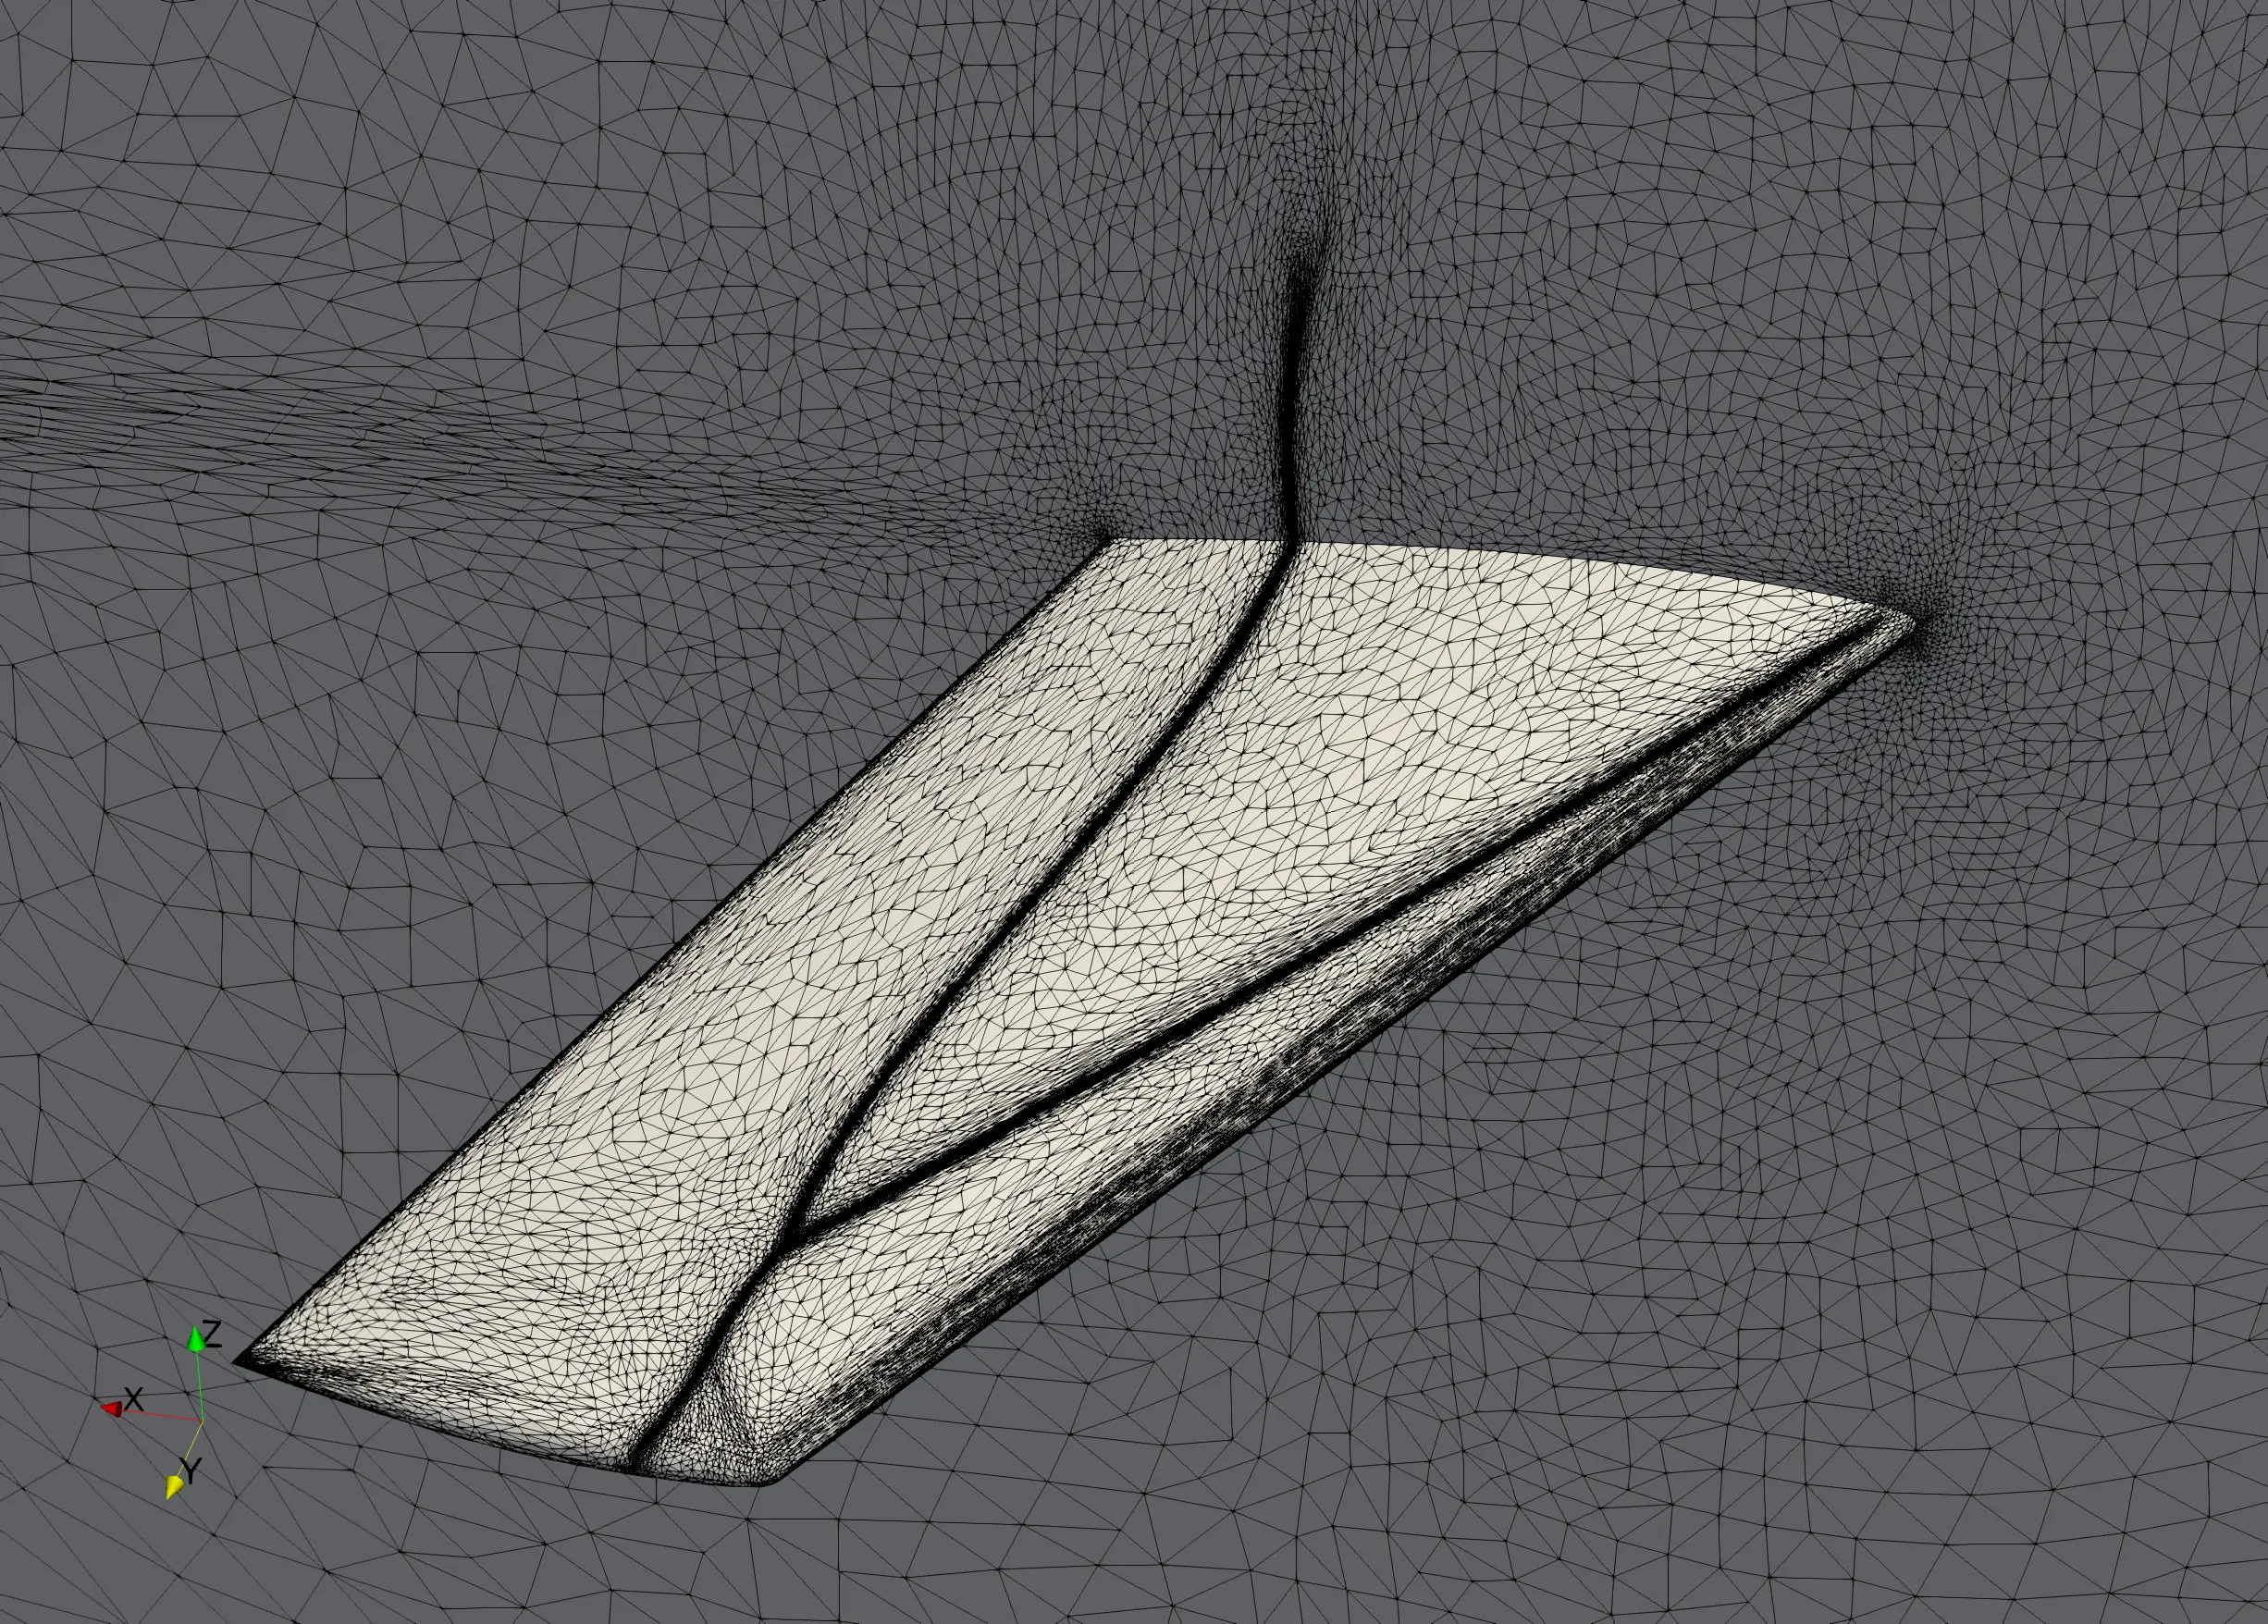 Onera M6 wing. Adapted based on the featrures of the inviscid flow using CDT3D (580k vertices)